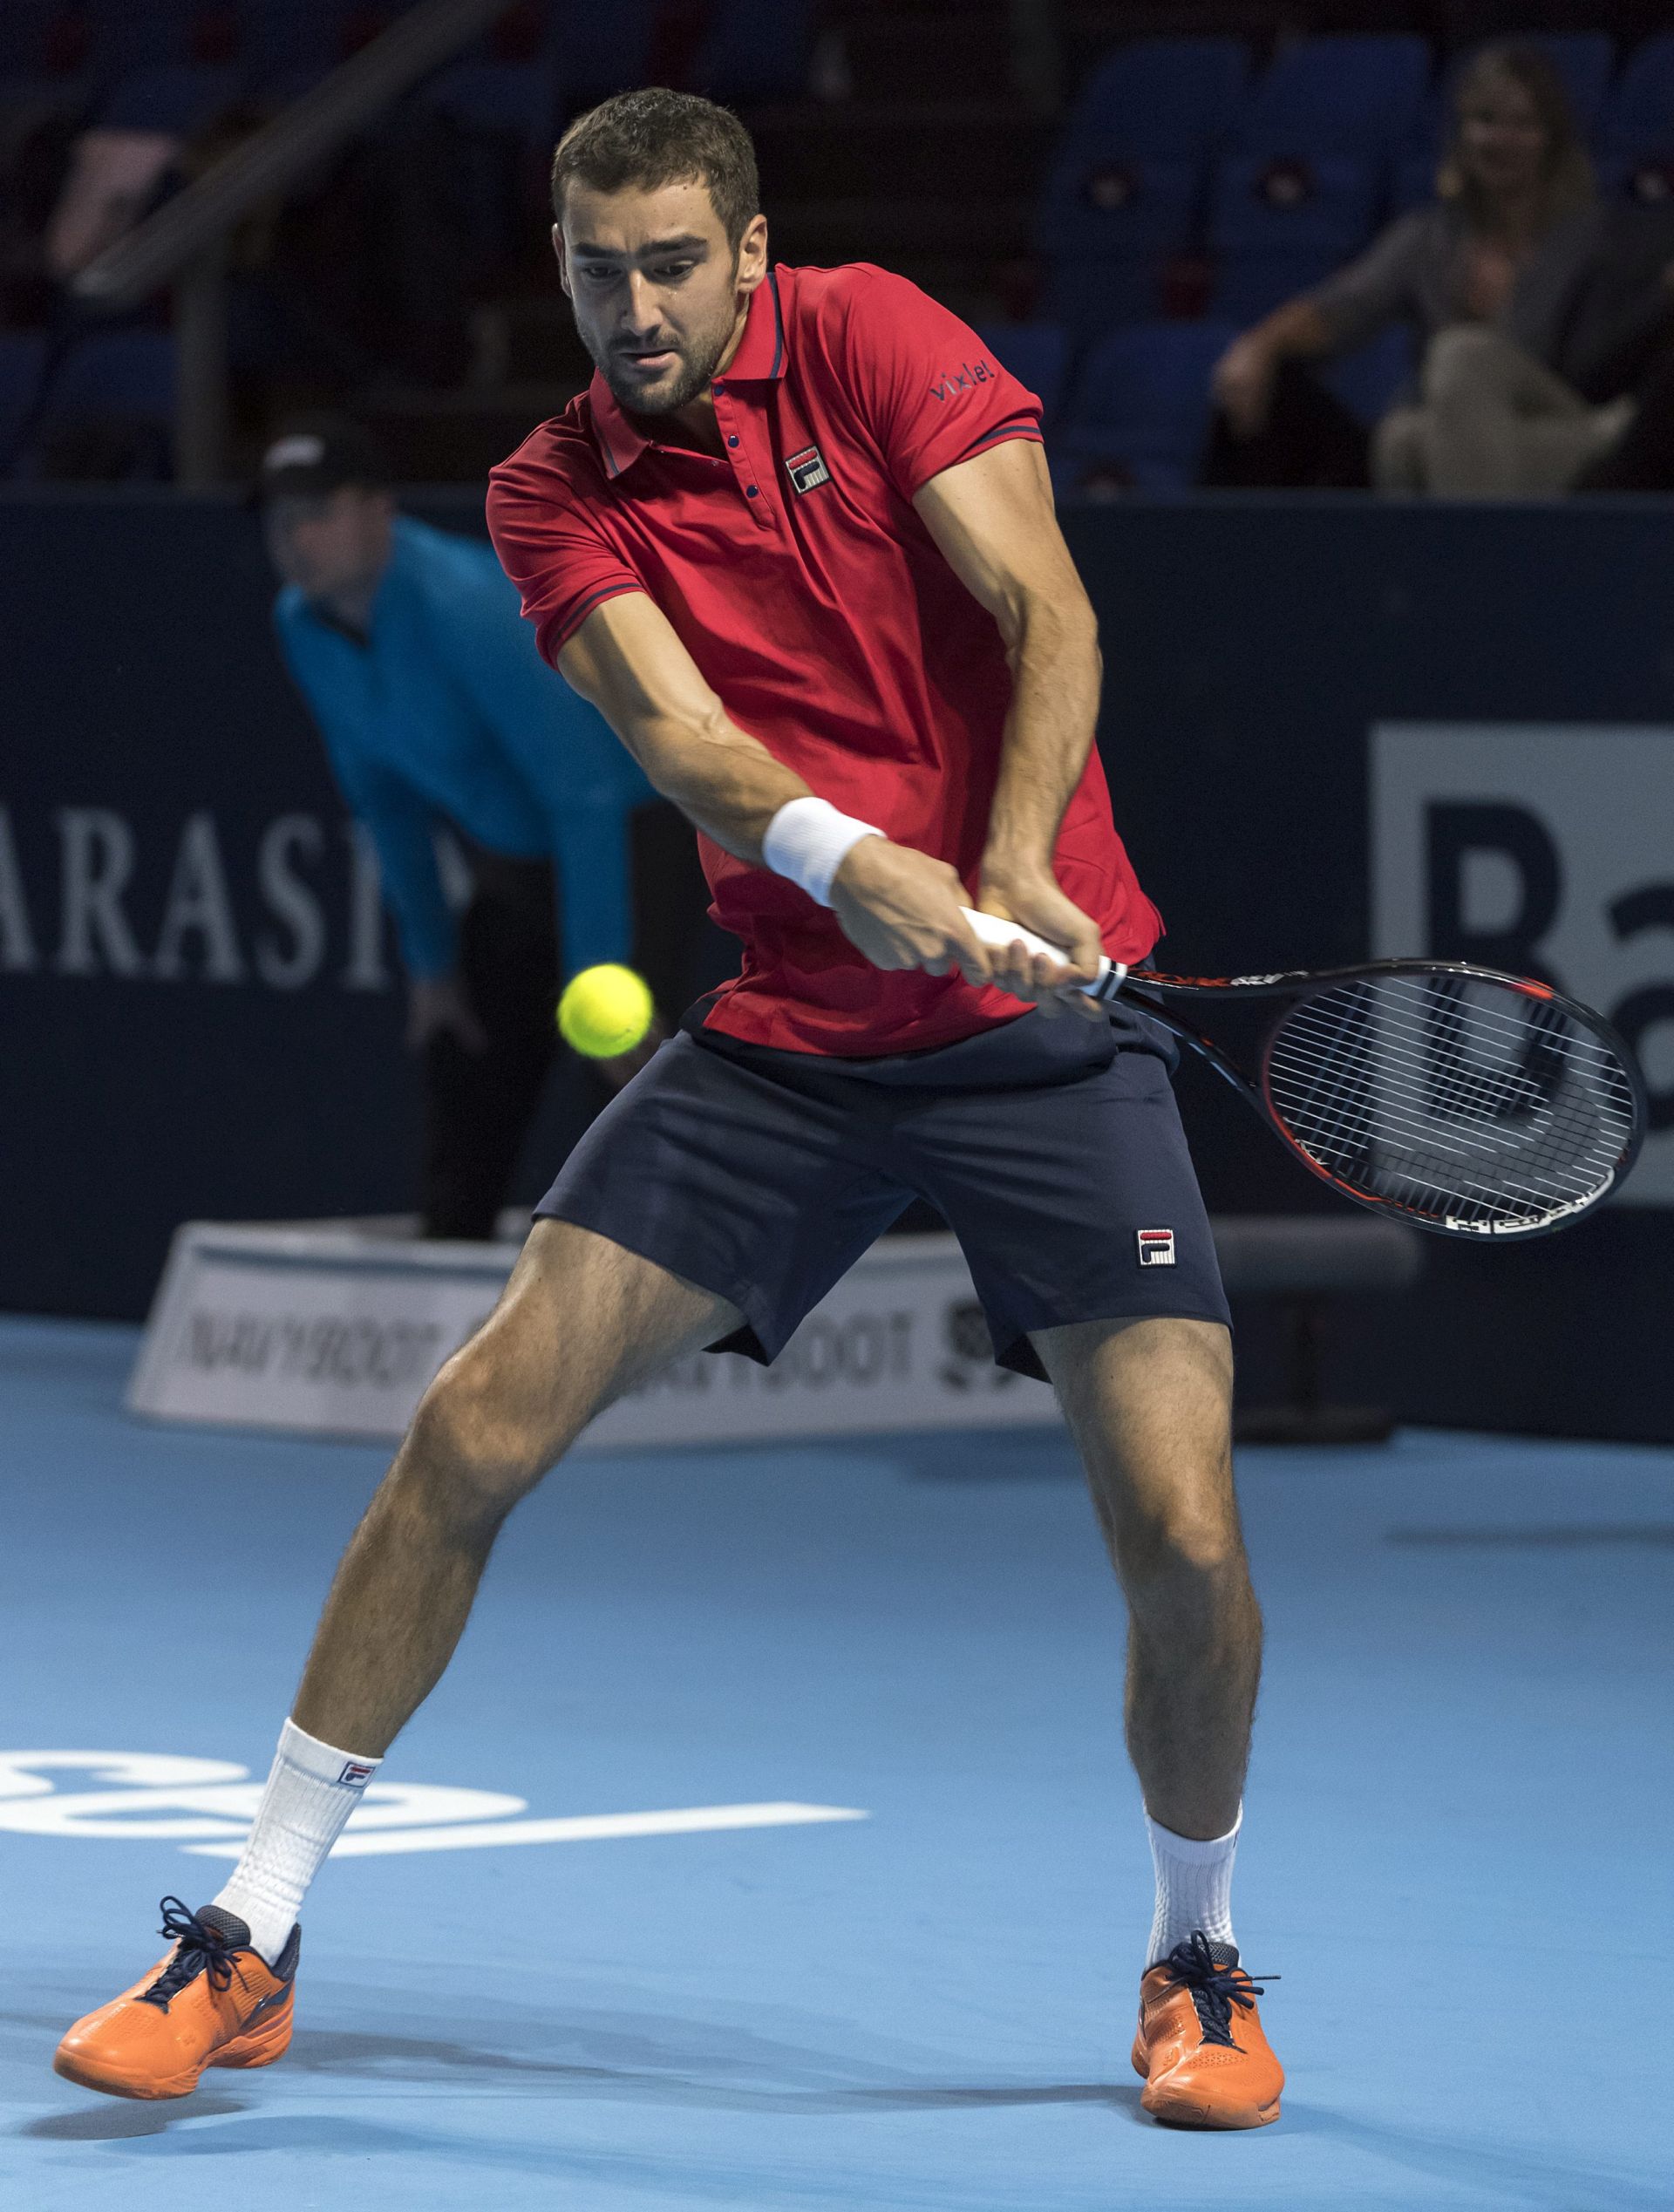 epa05601332 Croatia's Marin Cilic in action against Russia's Mikhail Youzhny  during their first round match for the Swiss Indoors tennis tournament at the St. Jakobshalle in Basel, Switzerland, 24 October 2016.  EPA/GEORGIOS KEFALAS